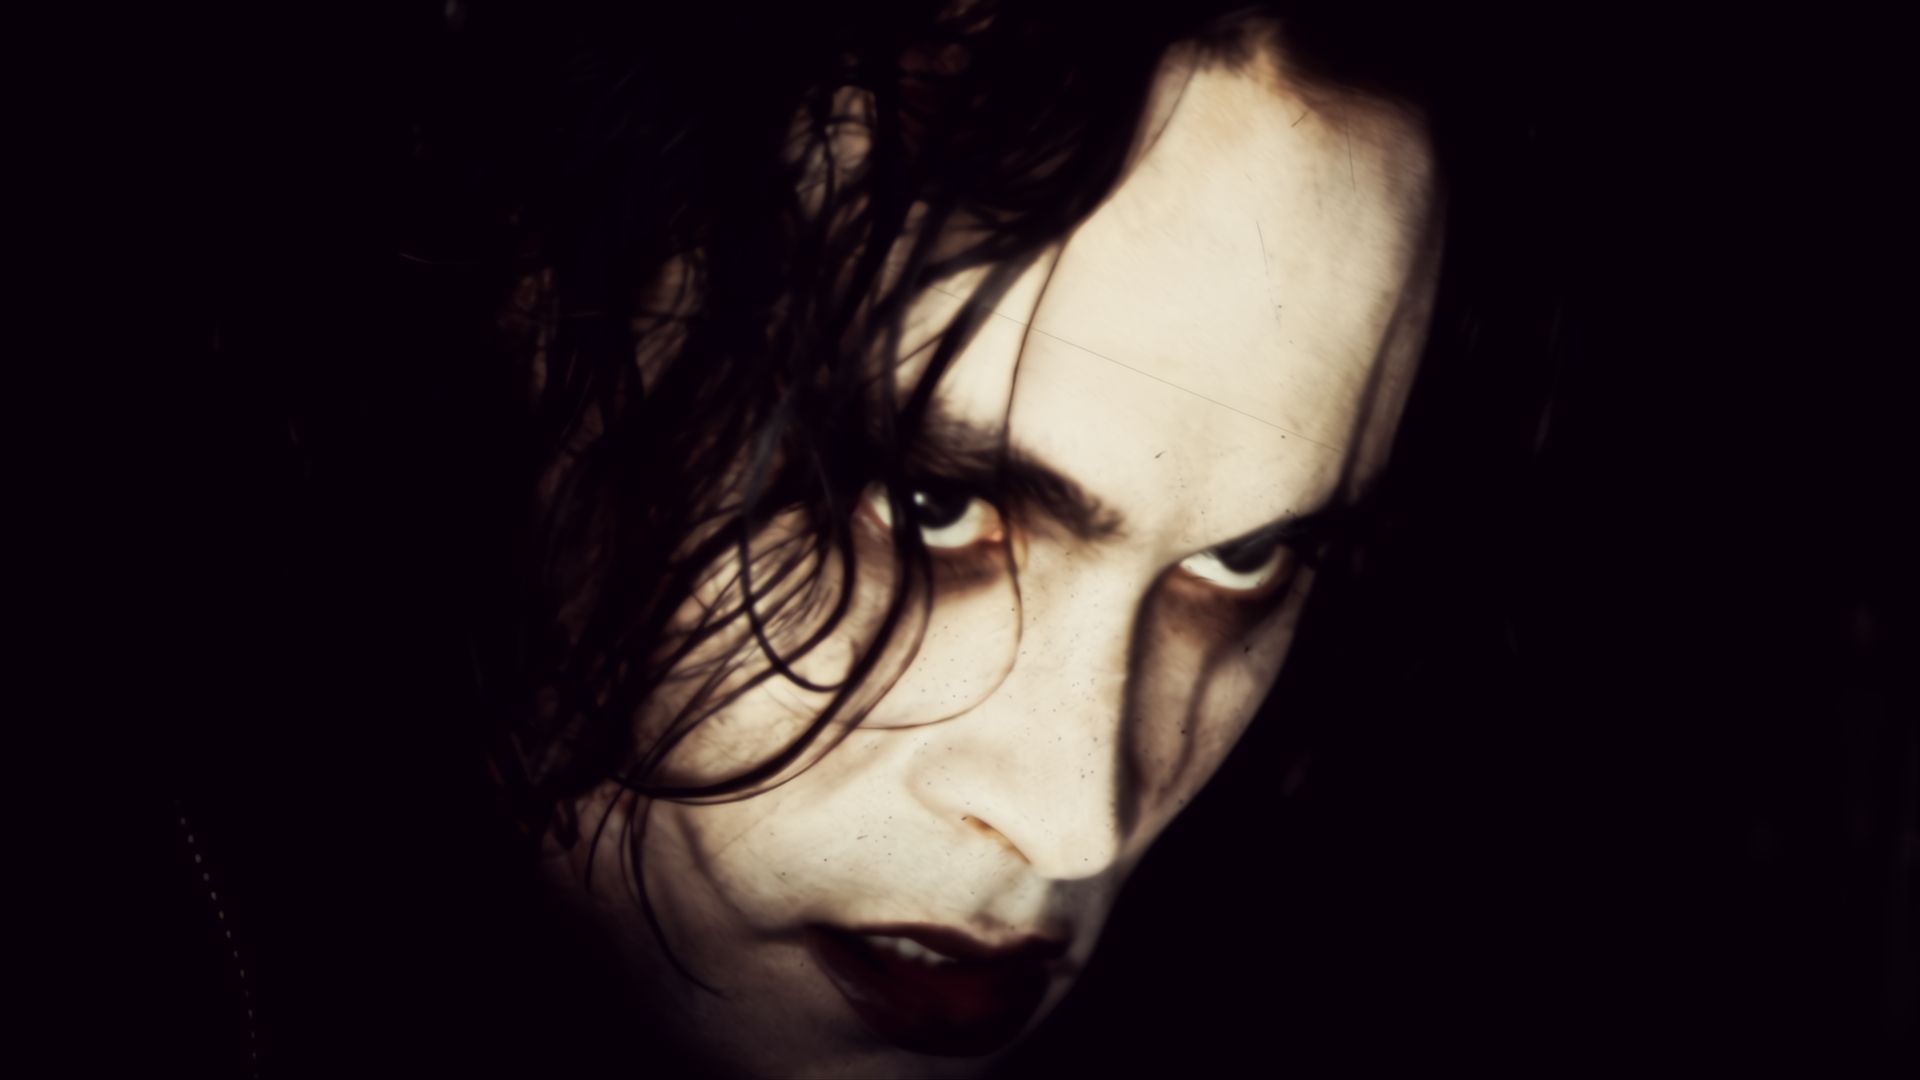 Brandon Lee as Eric Draven in closeup in 1994 movie The Crow